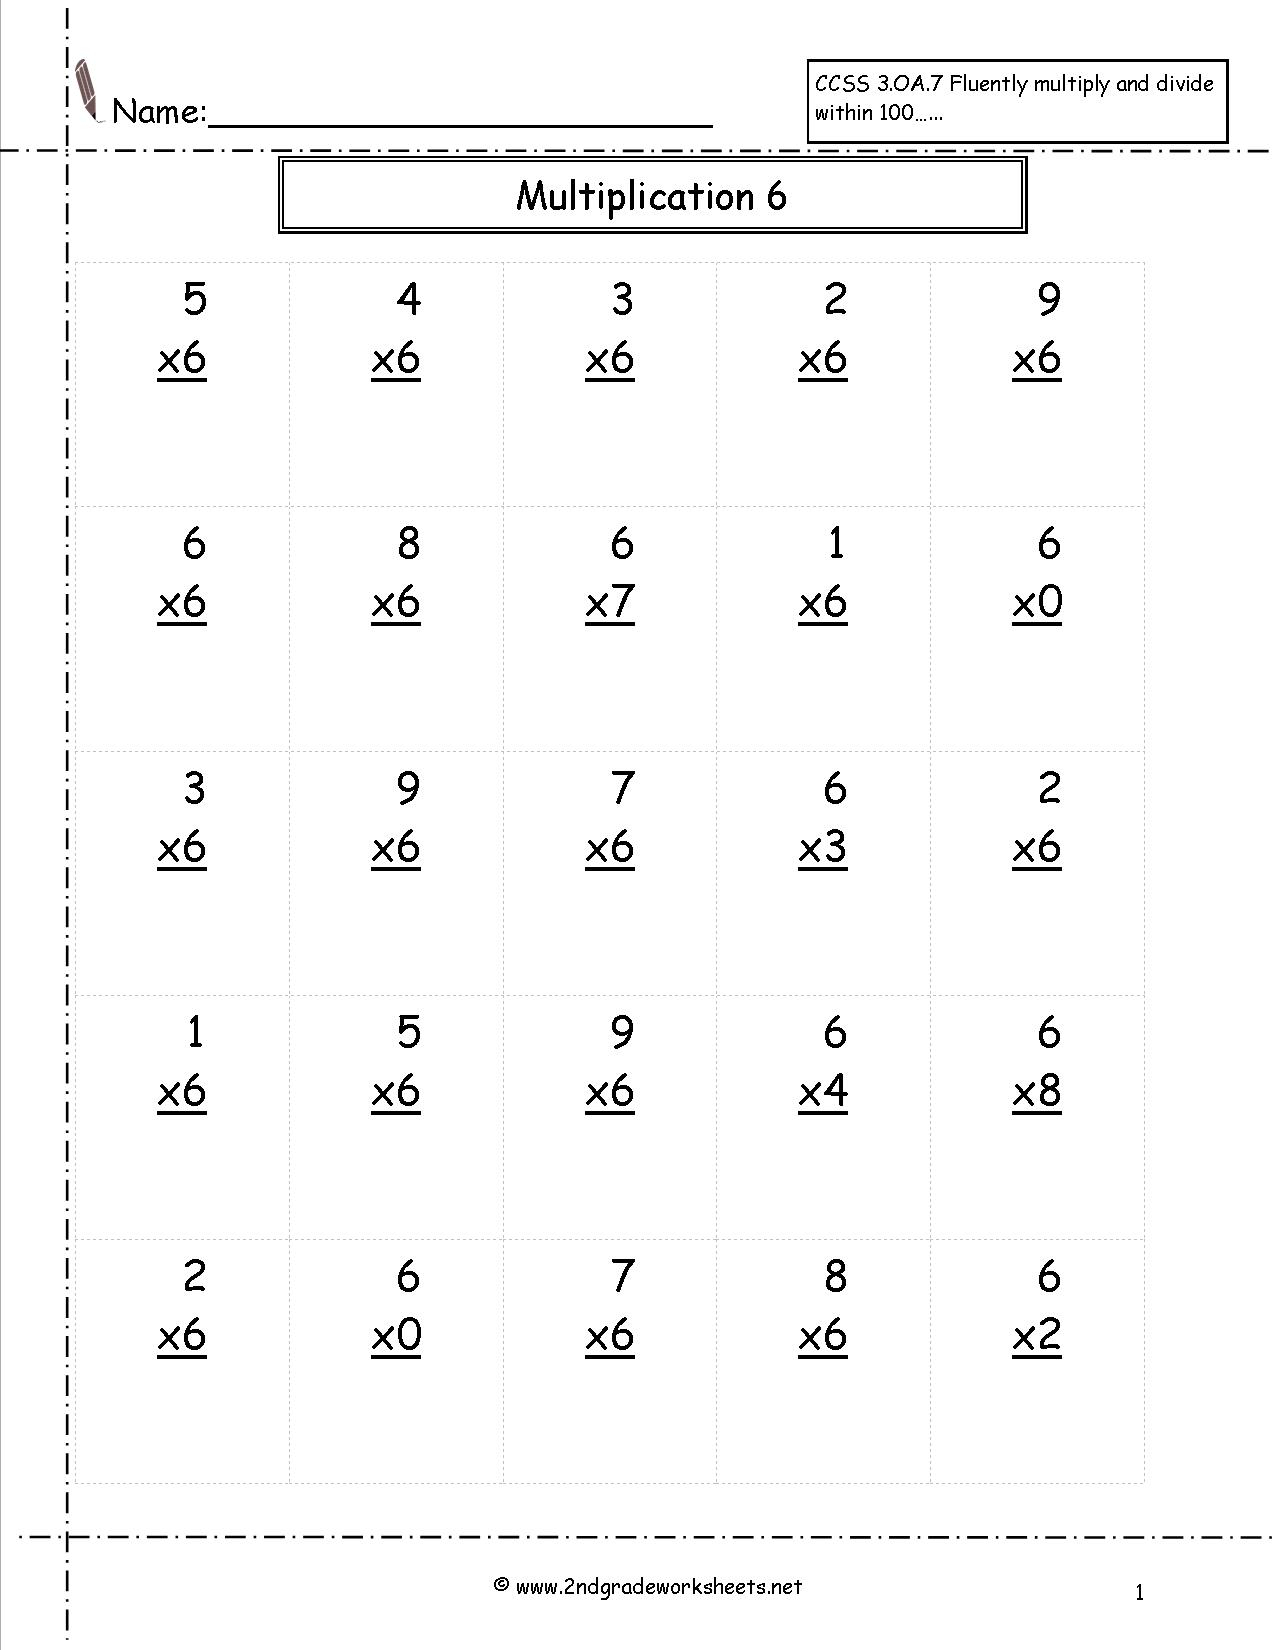 Multiplication - Lessons - Tes Teach throughout Worksheets Multiplication Grade 6